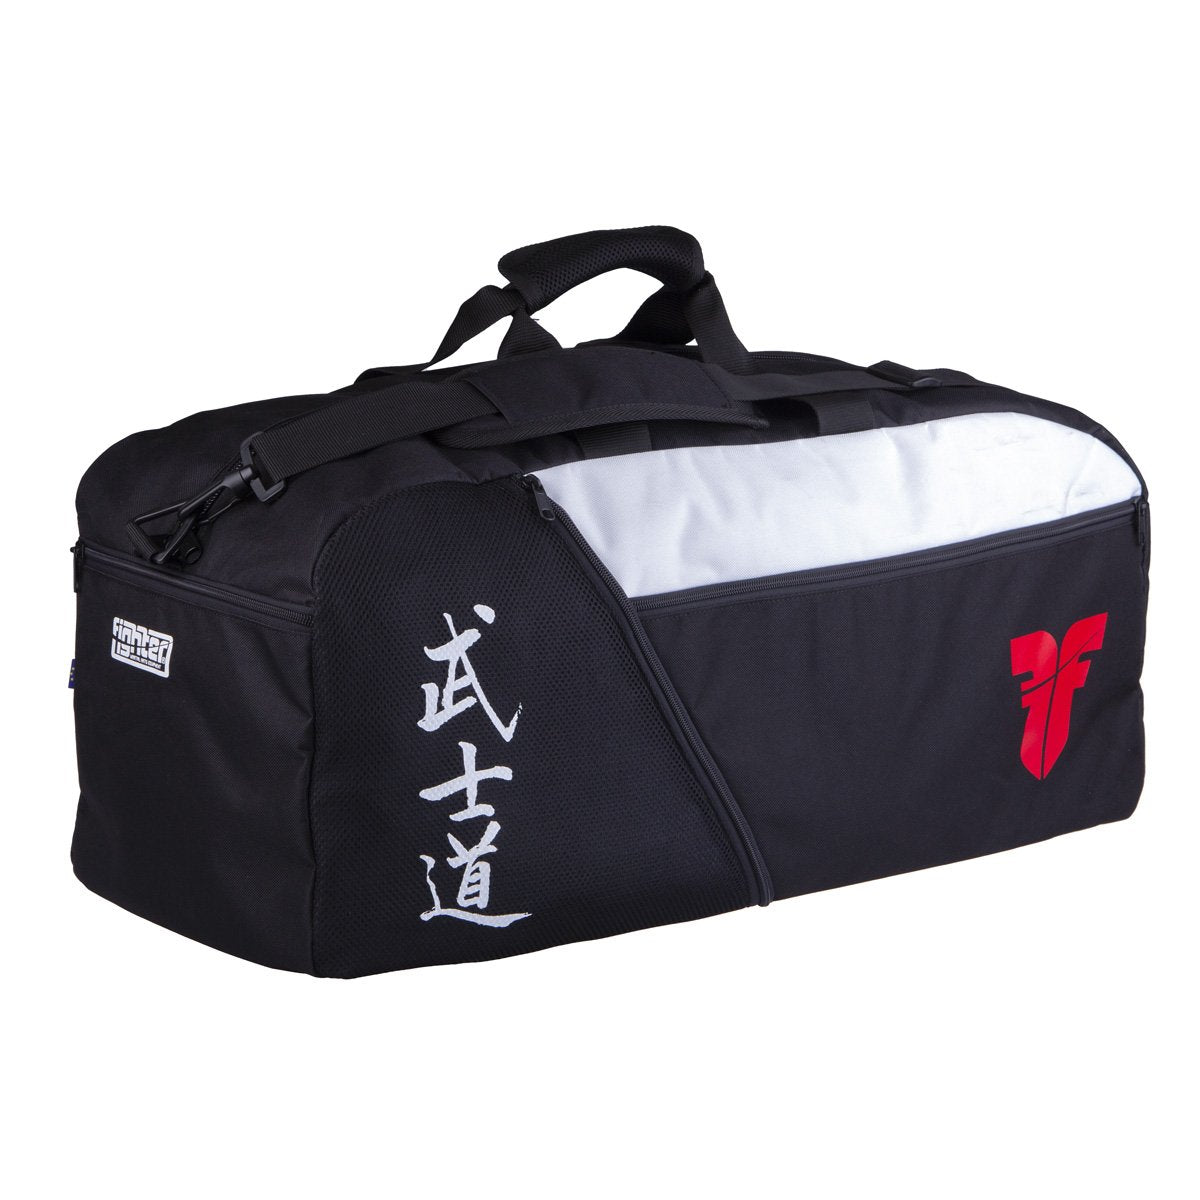 Sports Bag FIGHTER calligraphy - black